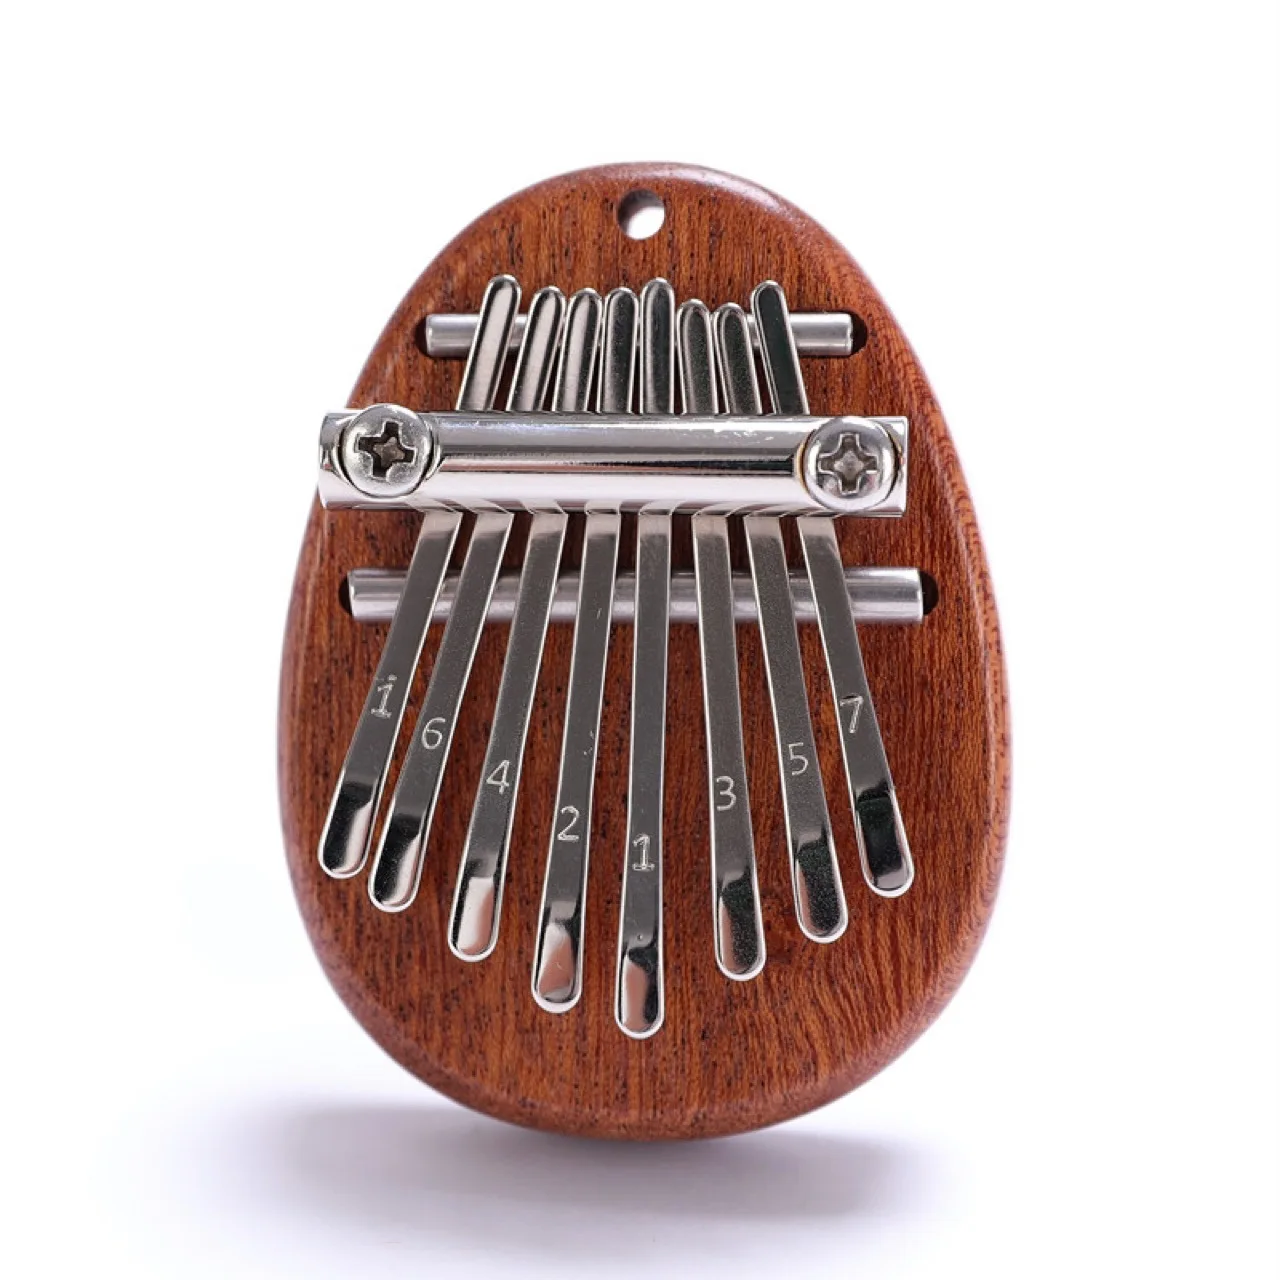 Adults and Beginners Birthday Gift/Christmas Gift/Valentines Day Gift/Party Gift Mini Finger Kalimba with 8 Keys for Kids Mini Kalimba Thumb Piano 2 Packs Include Gift box） 